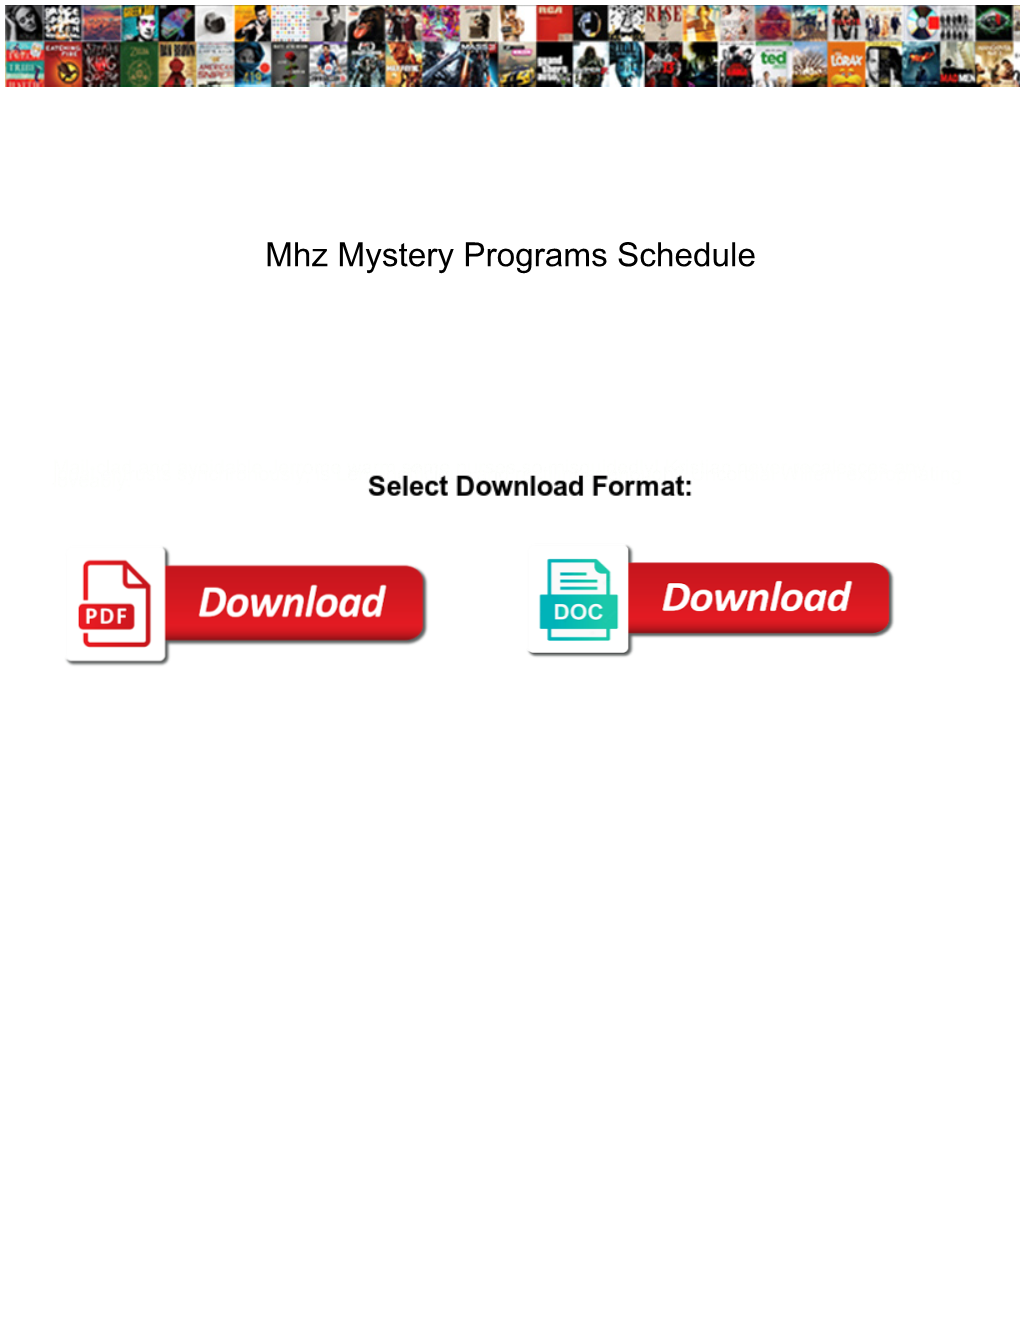 Mhz Mystery Programs Schedule